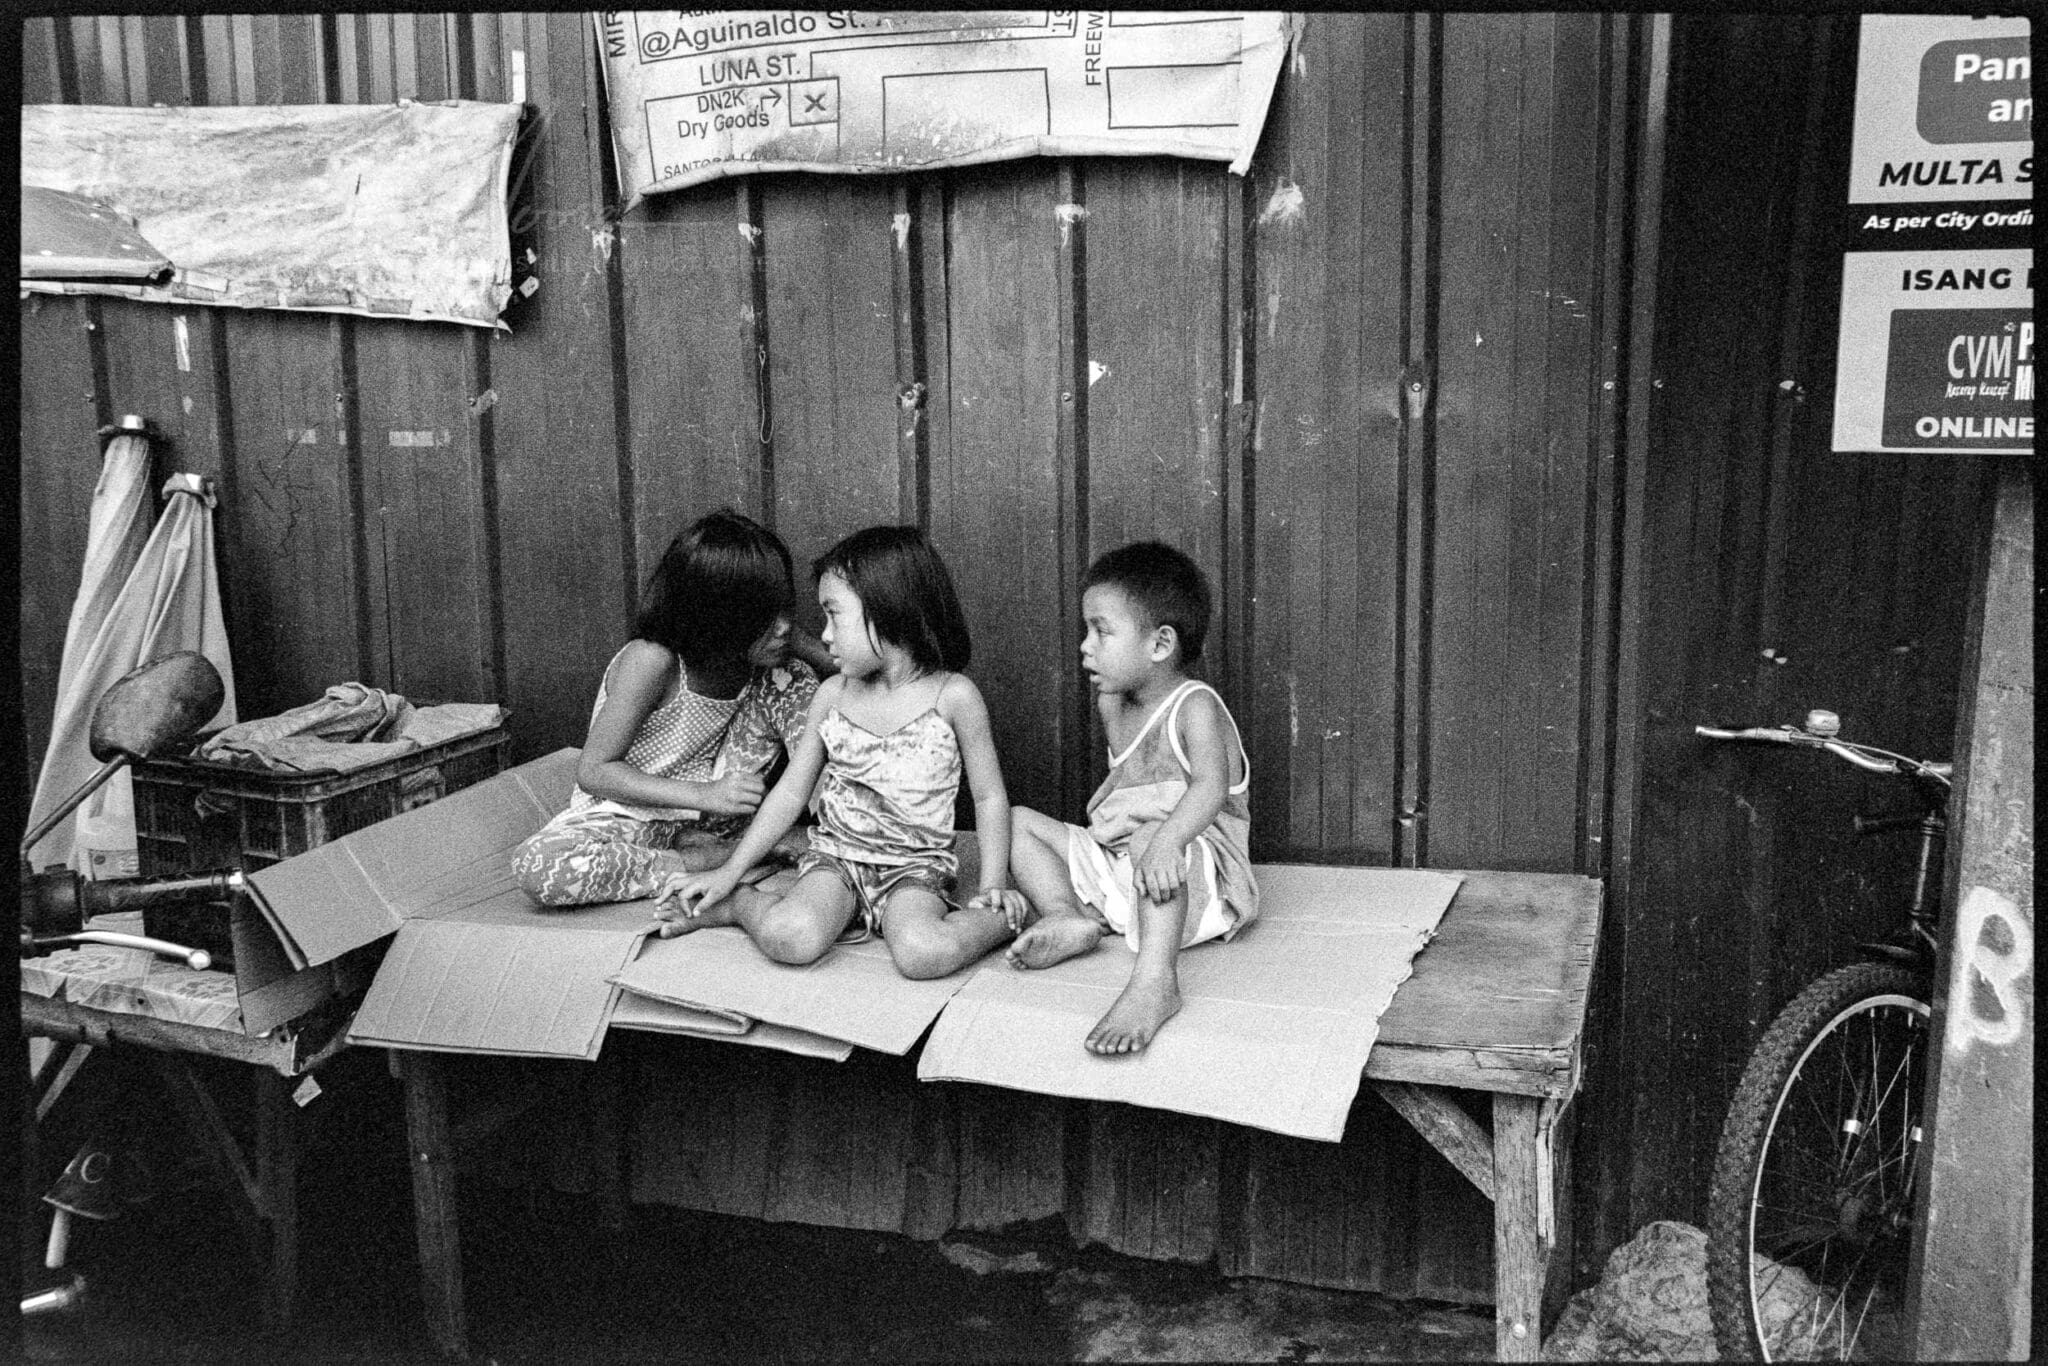 B&W film photograph of children at rest in the Philippines